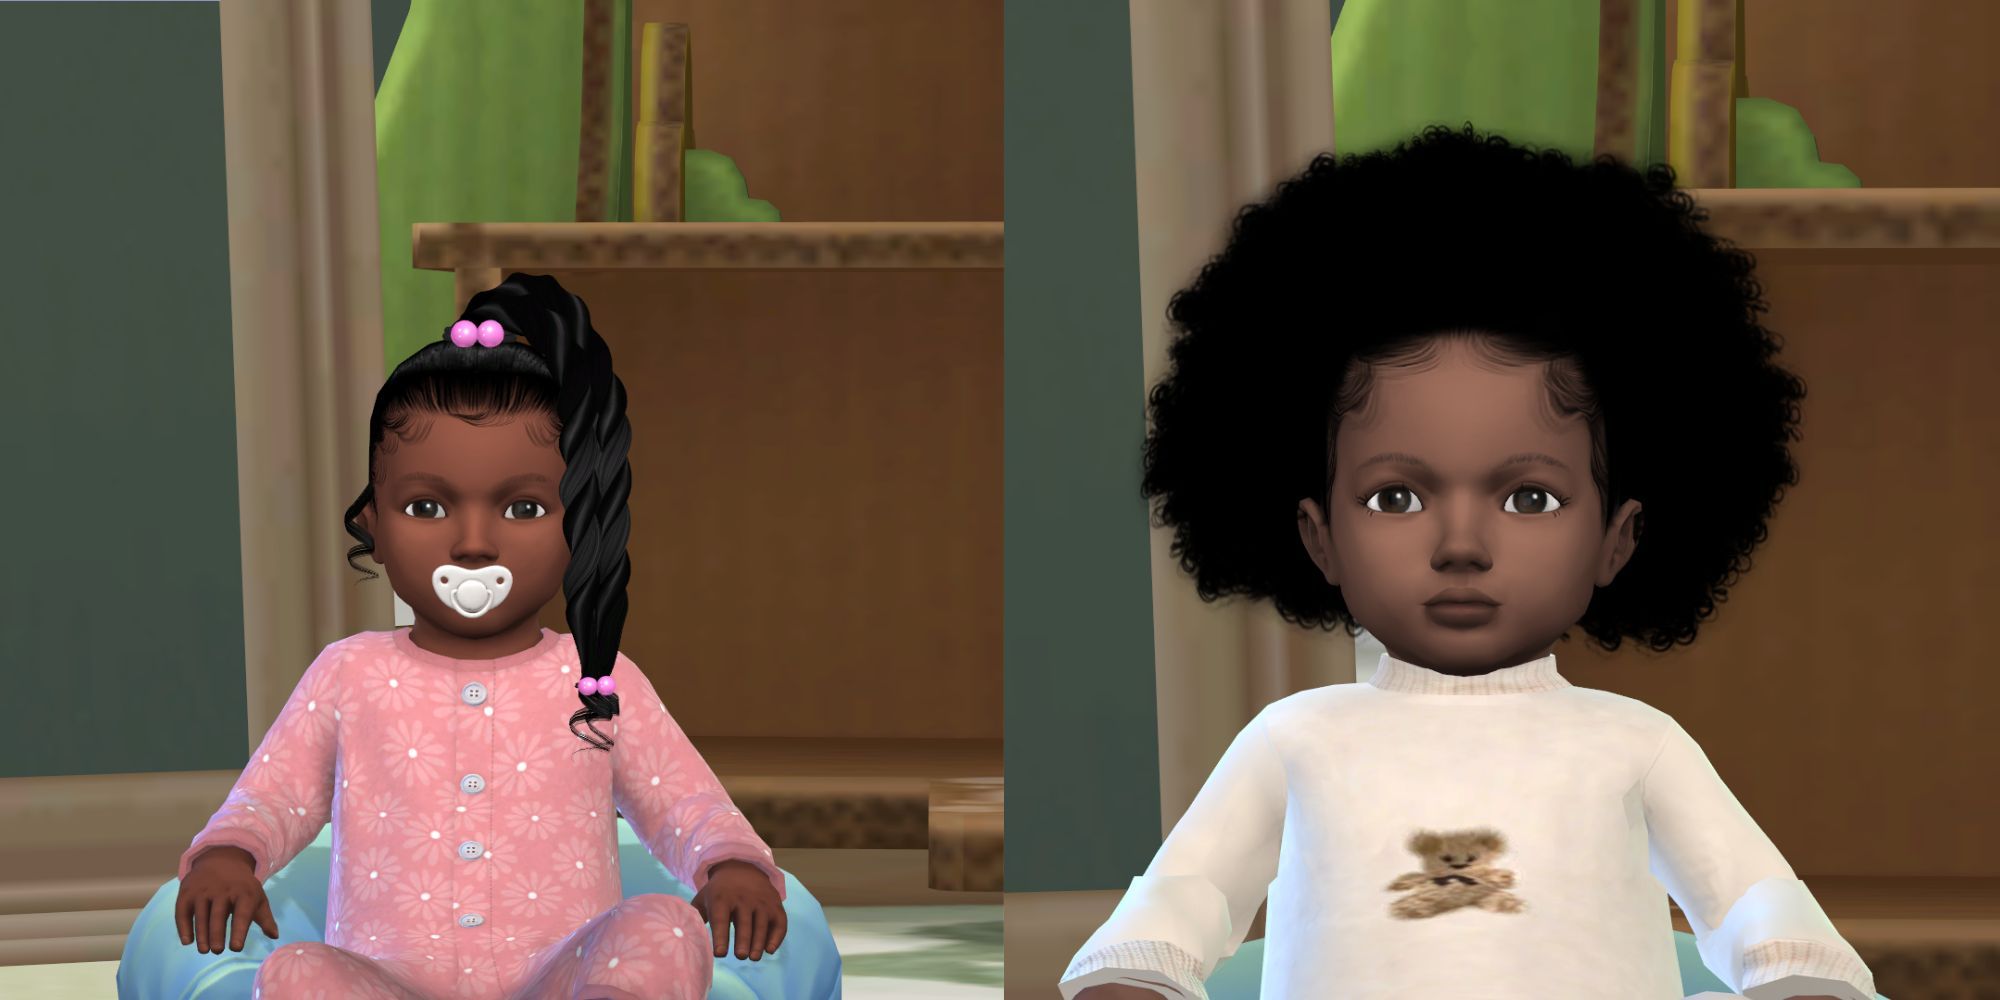 The Sims 4 Curly Fro Hairstyle By XxBlacksims cc